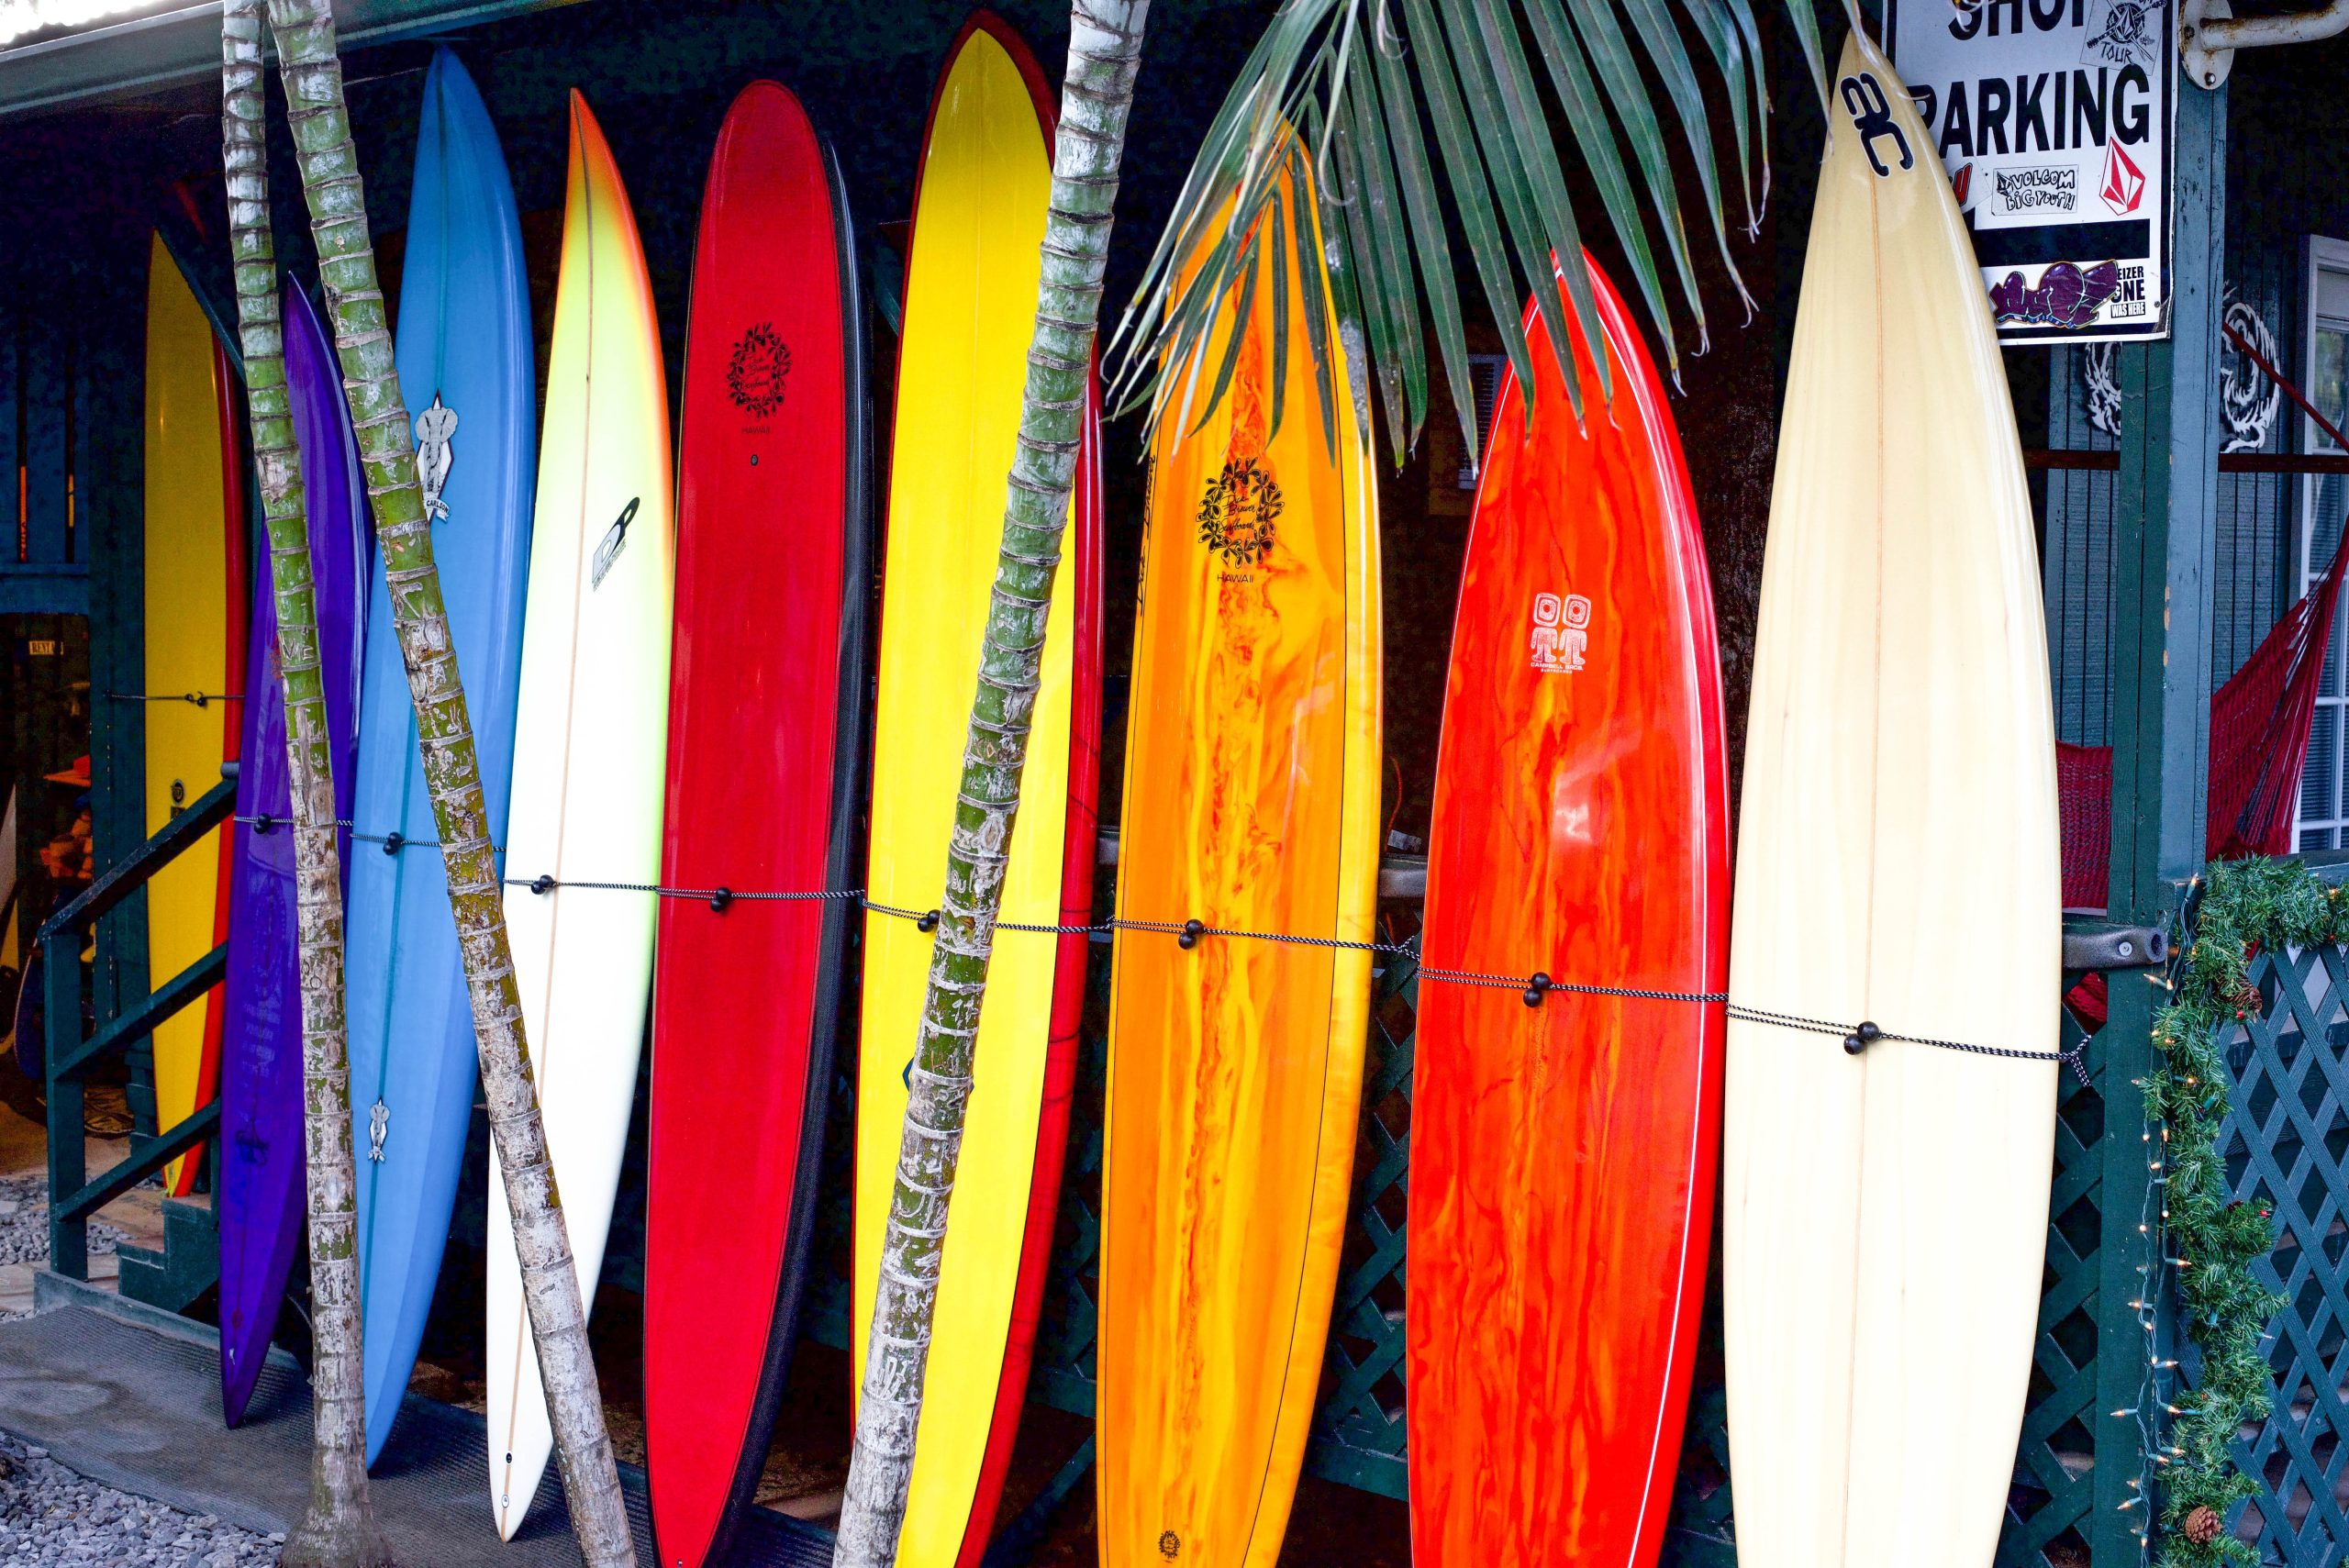 Visit The Australian National Surfing Museum!